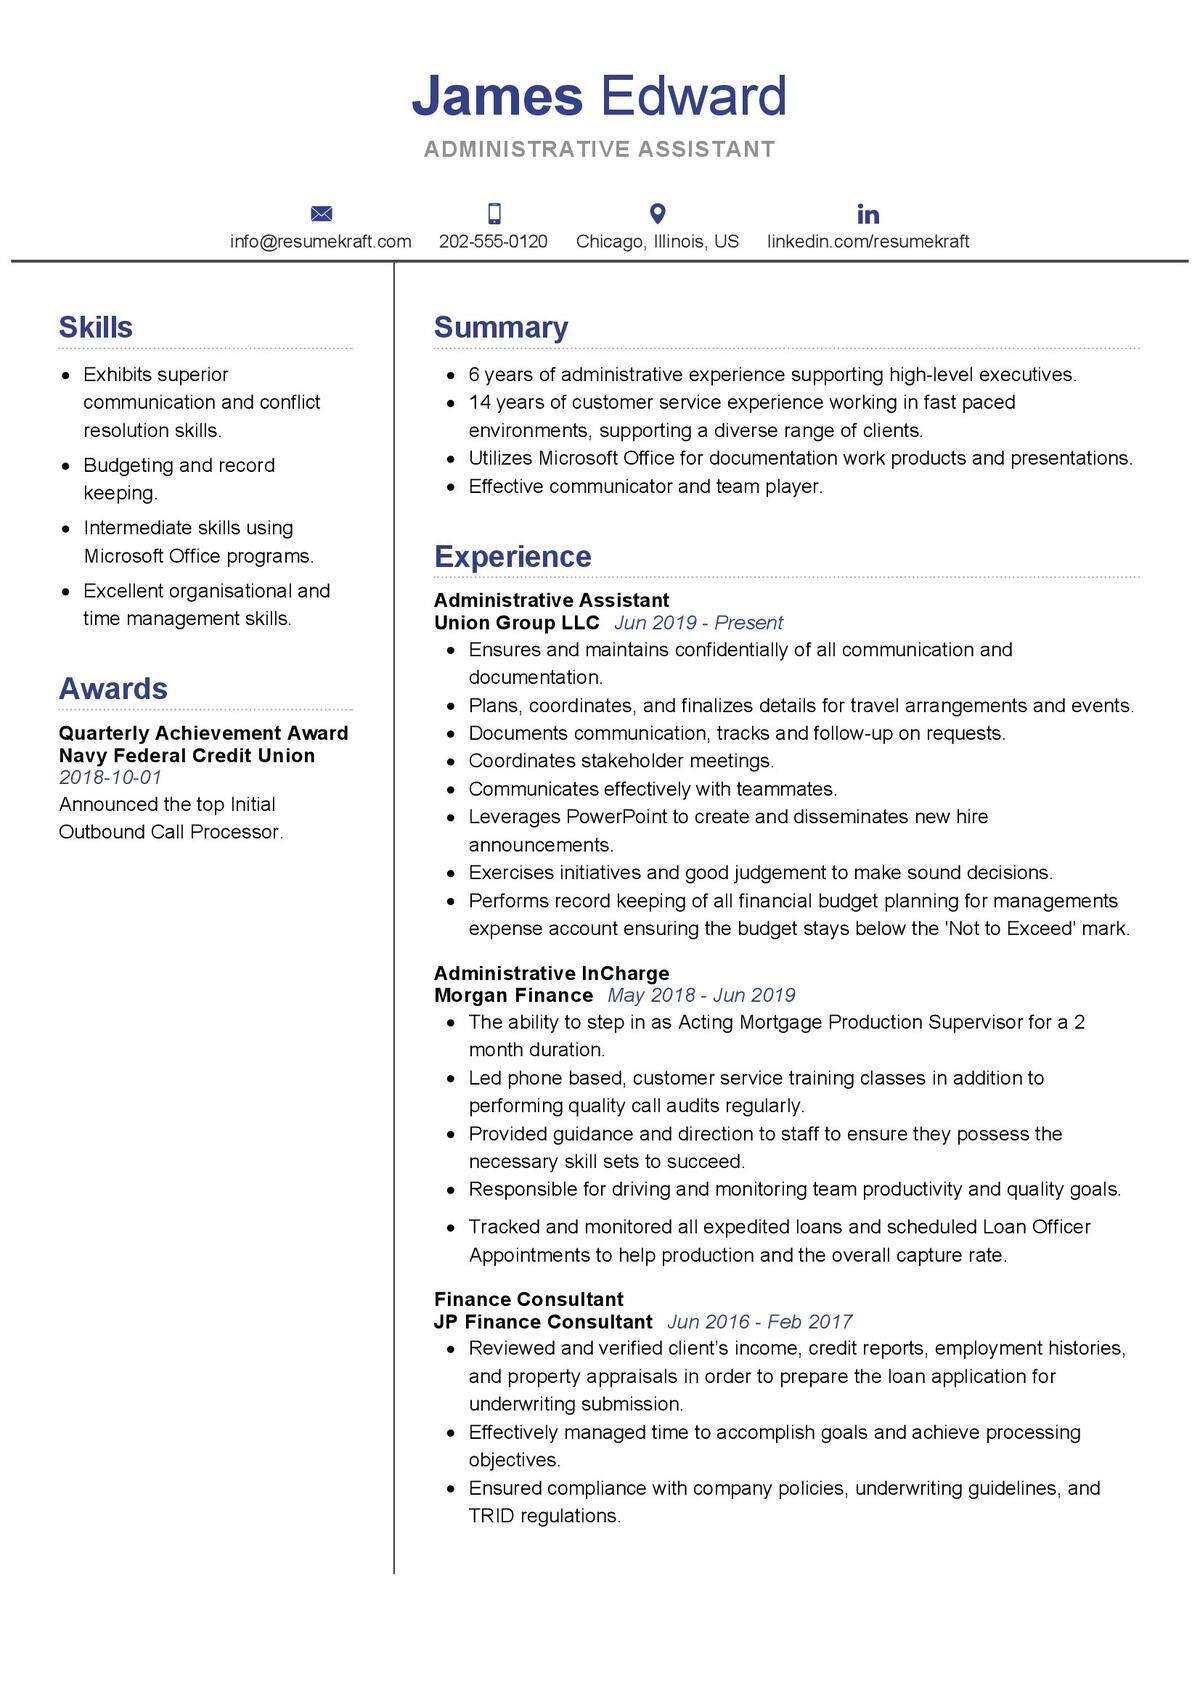 Resume Sample for Administrative assistant with No Experience Administrative assistant Resume Sample 2021 Writing Guide …